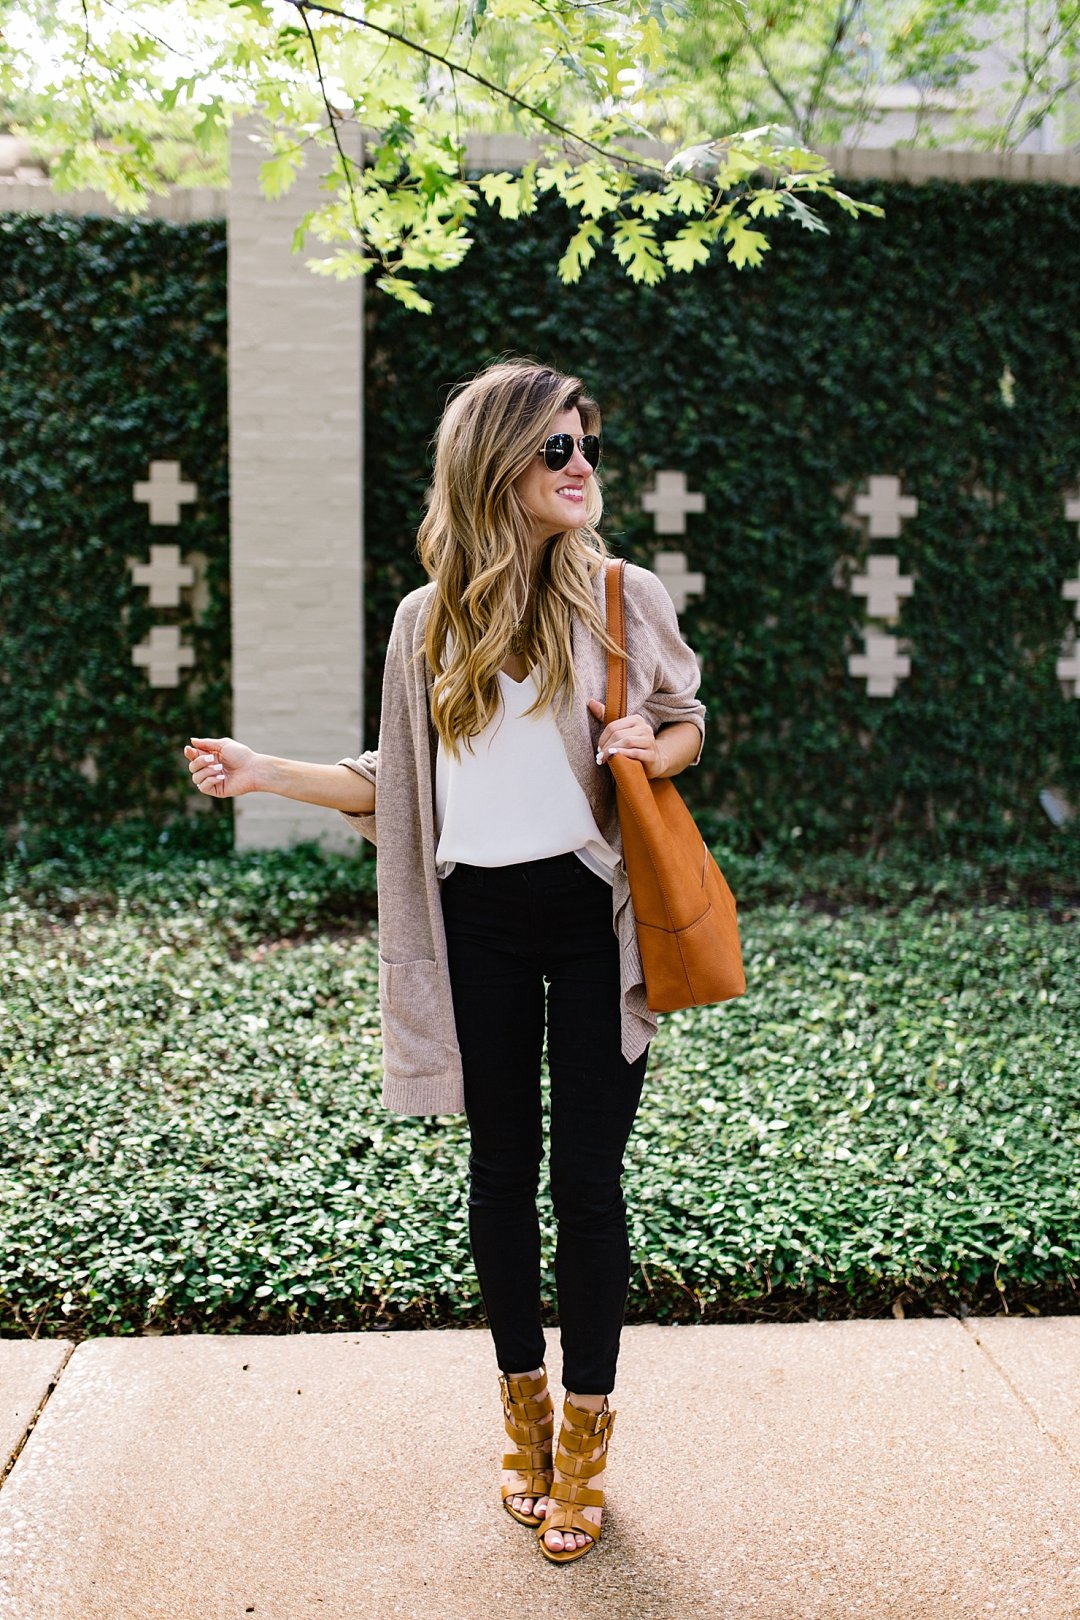 black jean outfit idea // transitional outfit idea // cute outfit with black jeans // black jeans outfit // cardigan outfit // brightontheday wearing black and brown combination for transitional fall outfit